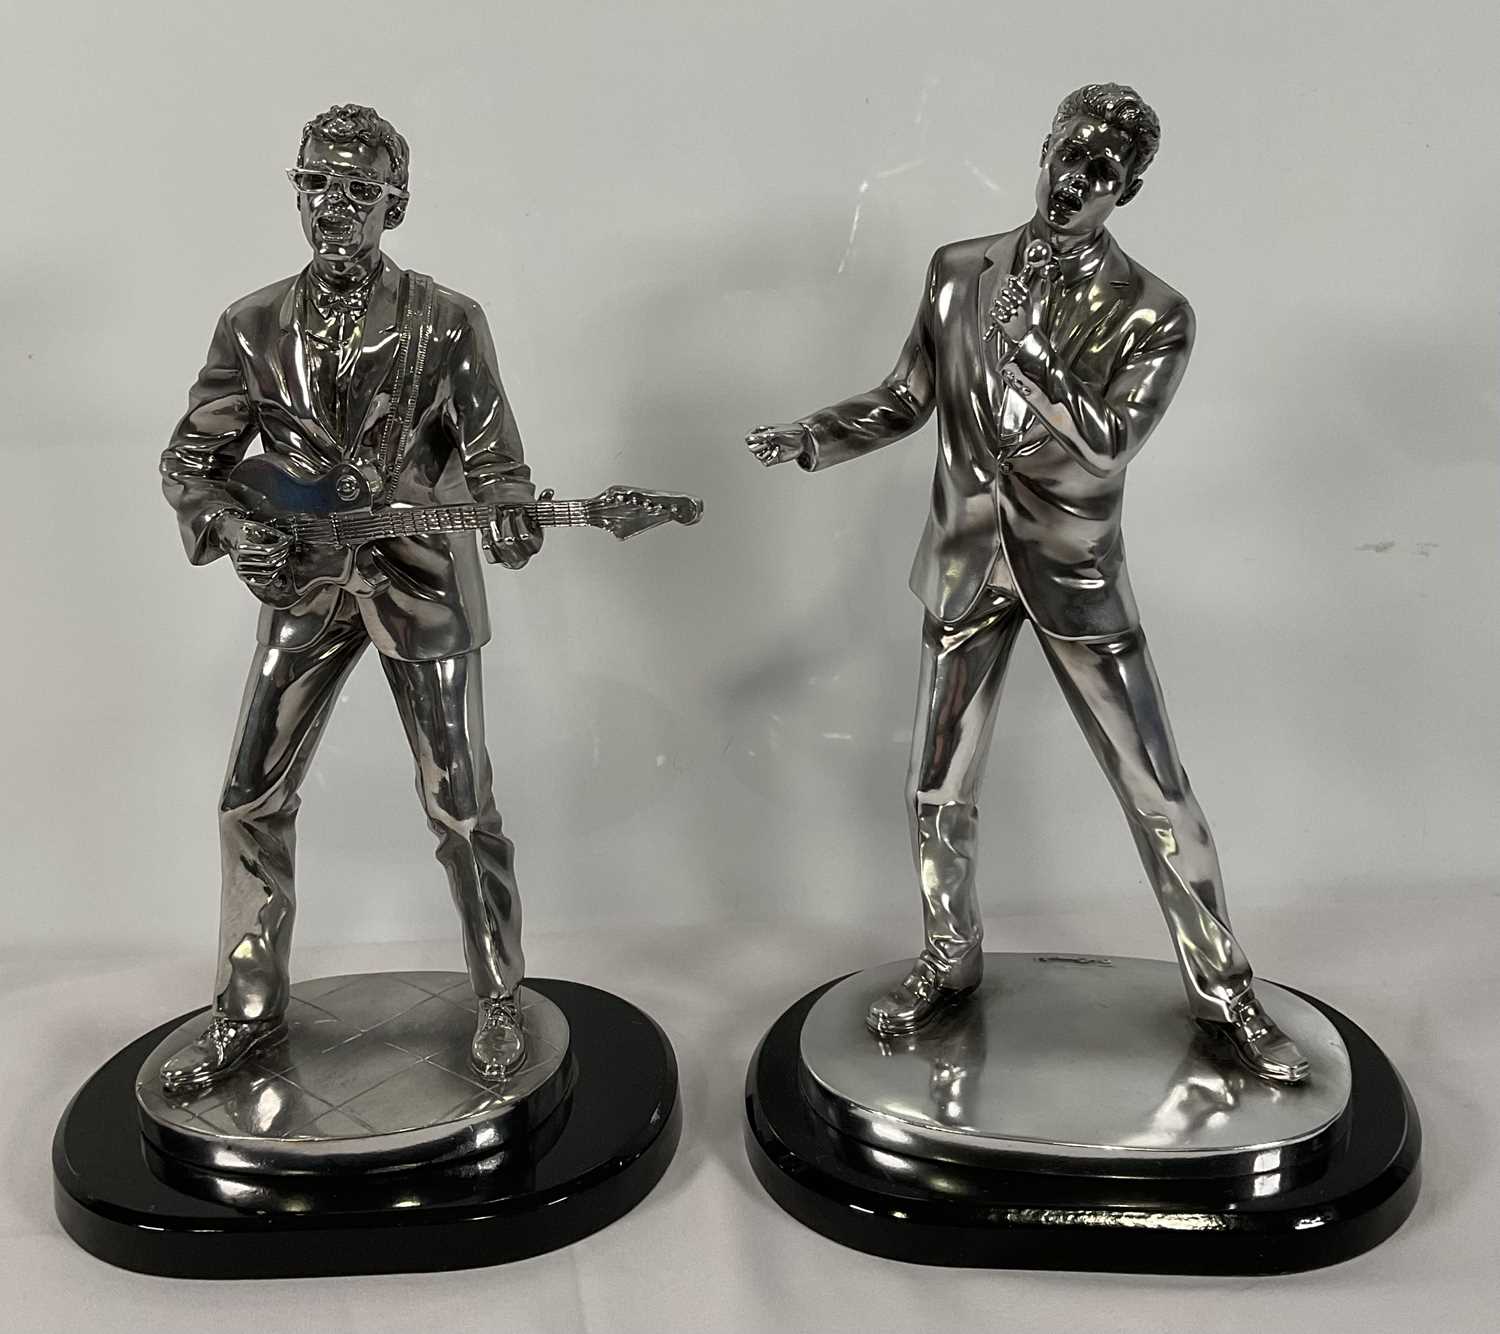 A pair of Silver Dreams by Leonardo (2005/6) statuettes of Cliff Richard and Hank Marvin in